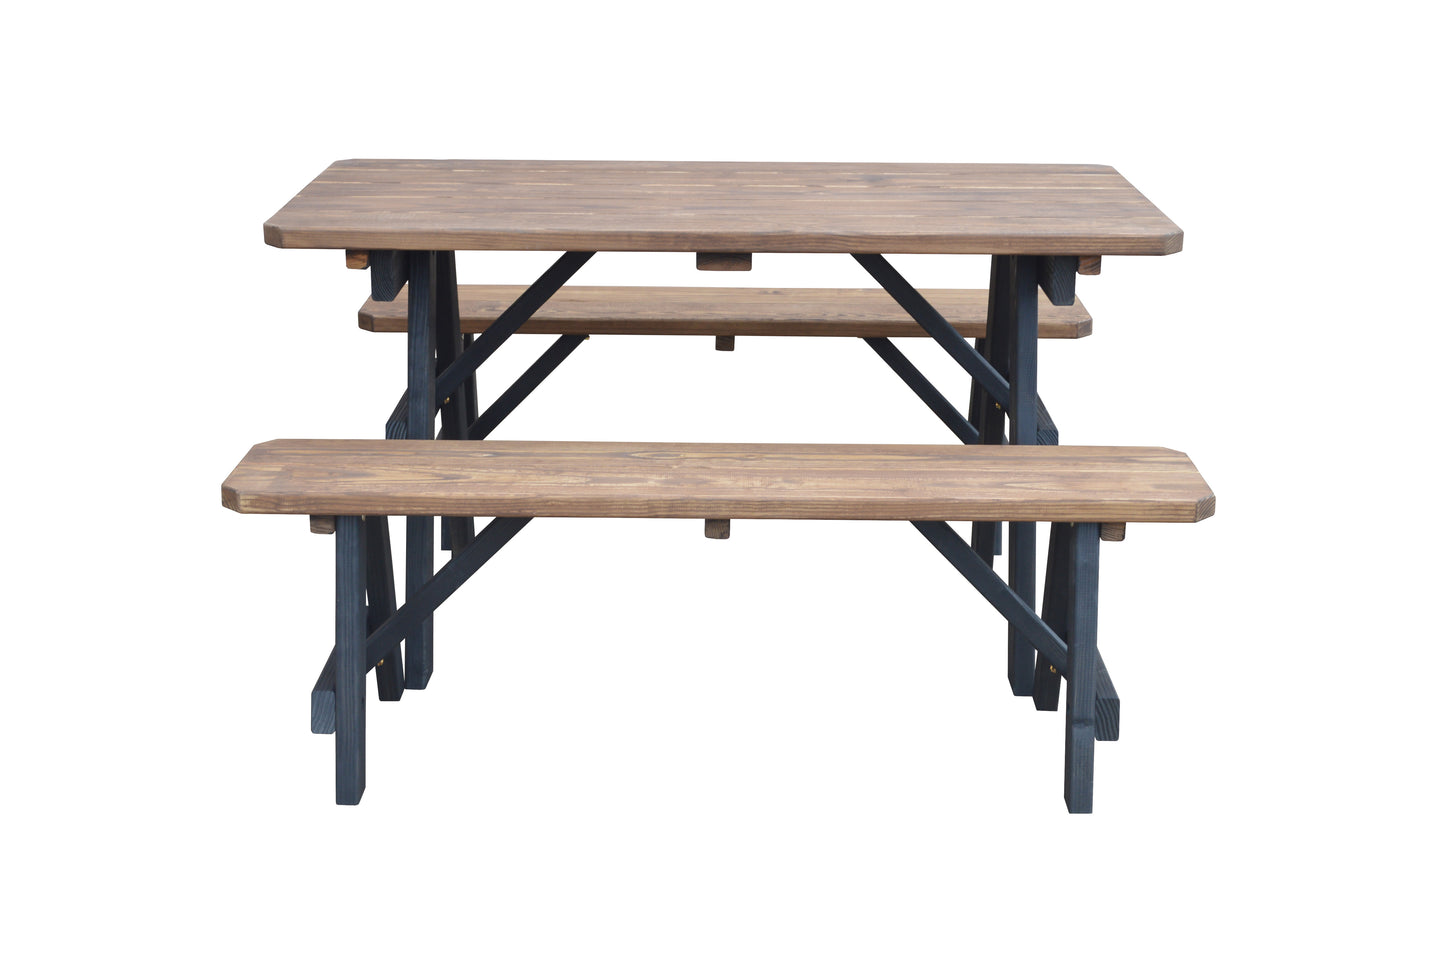 A&L Furniture Co. Pressure Treated Pine 5' Traditional Picnic Table w/2 Benches Mushroom on Black - LEAD TIME TO SHIP 10 BUSINESS DAYS